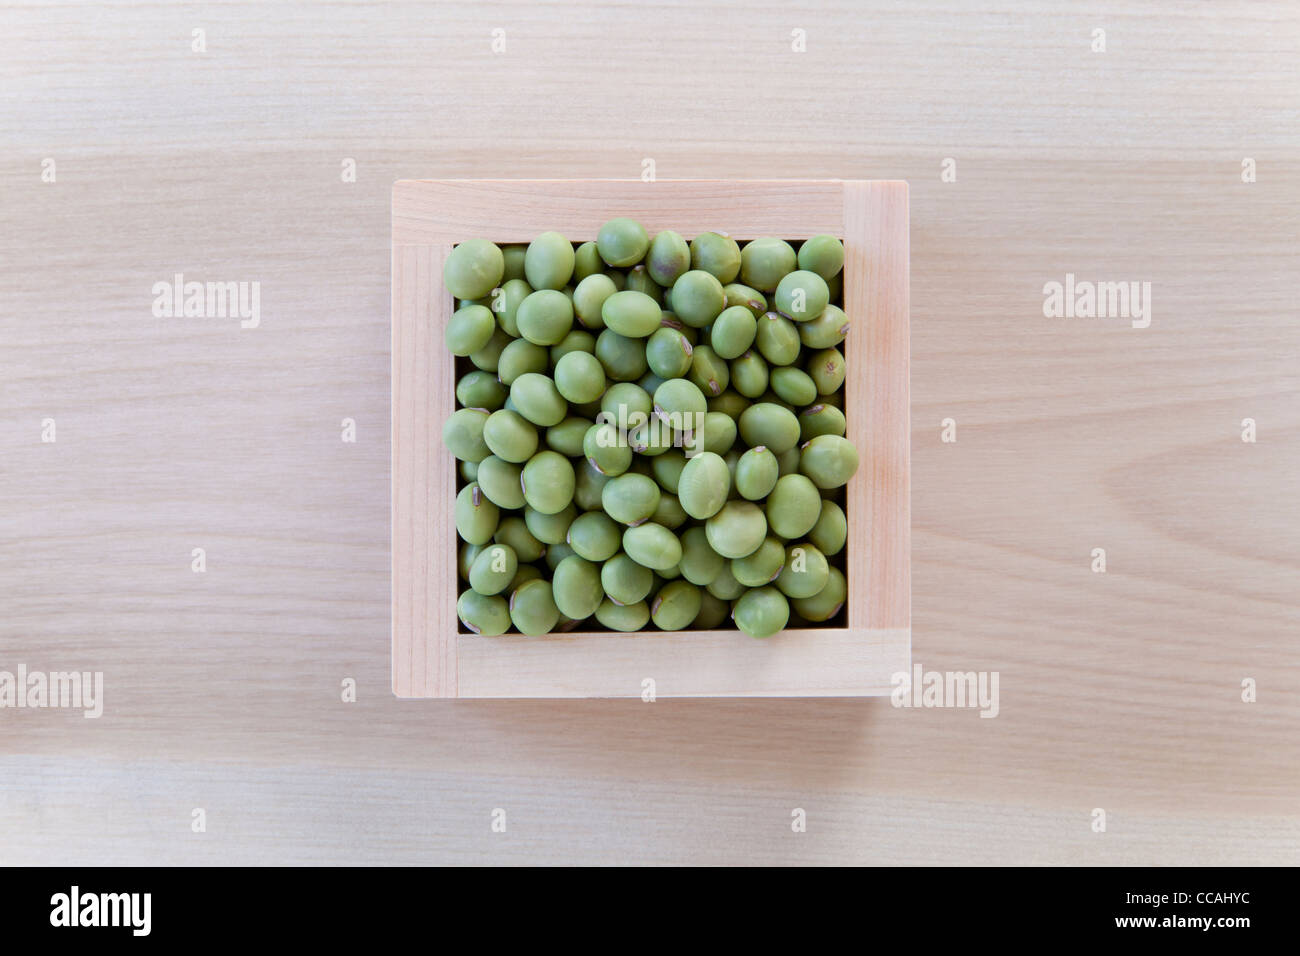 Mung Beans in Wooden Measure Box Stock Photo